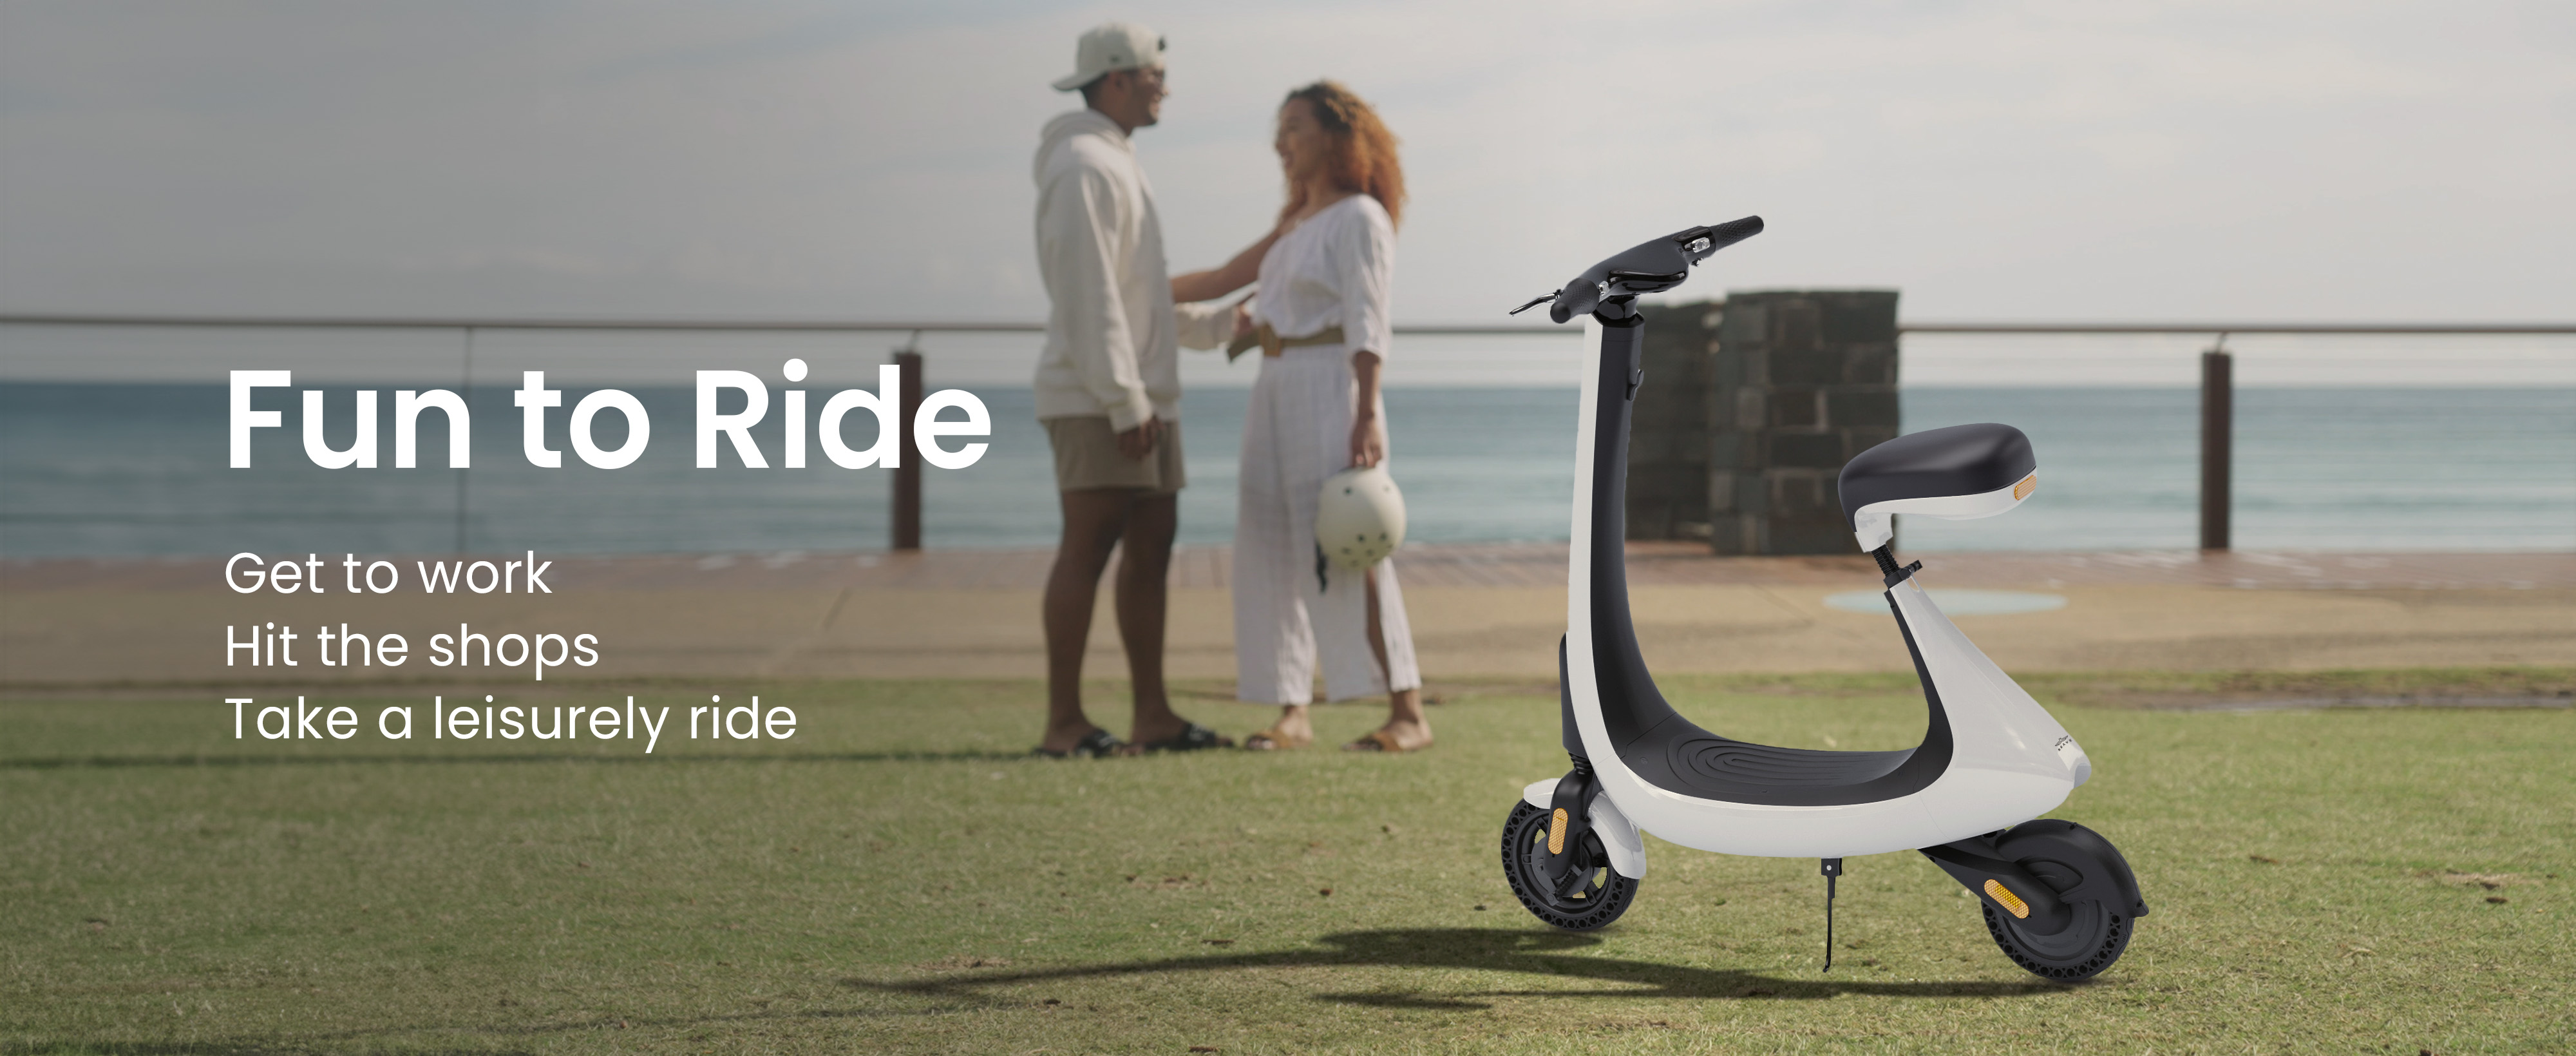 Brave BES-PRO Electric Scooter With Turn Signals, Full Twist Throttle, NFC Technology, EABS Brake System up to 25 km/h Speed, Max Range up to 70Km, 2" Honeycomb Tires, Dedicated Display and Built-in Bluetooth - White